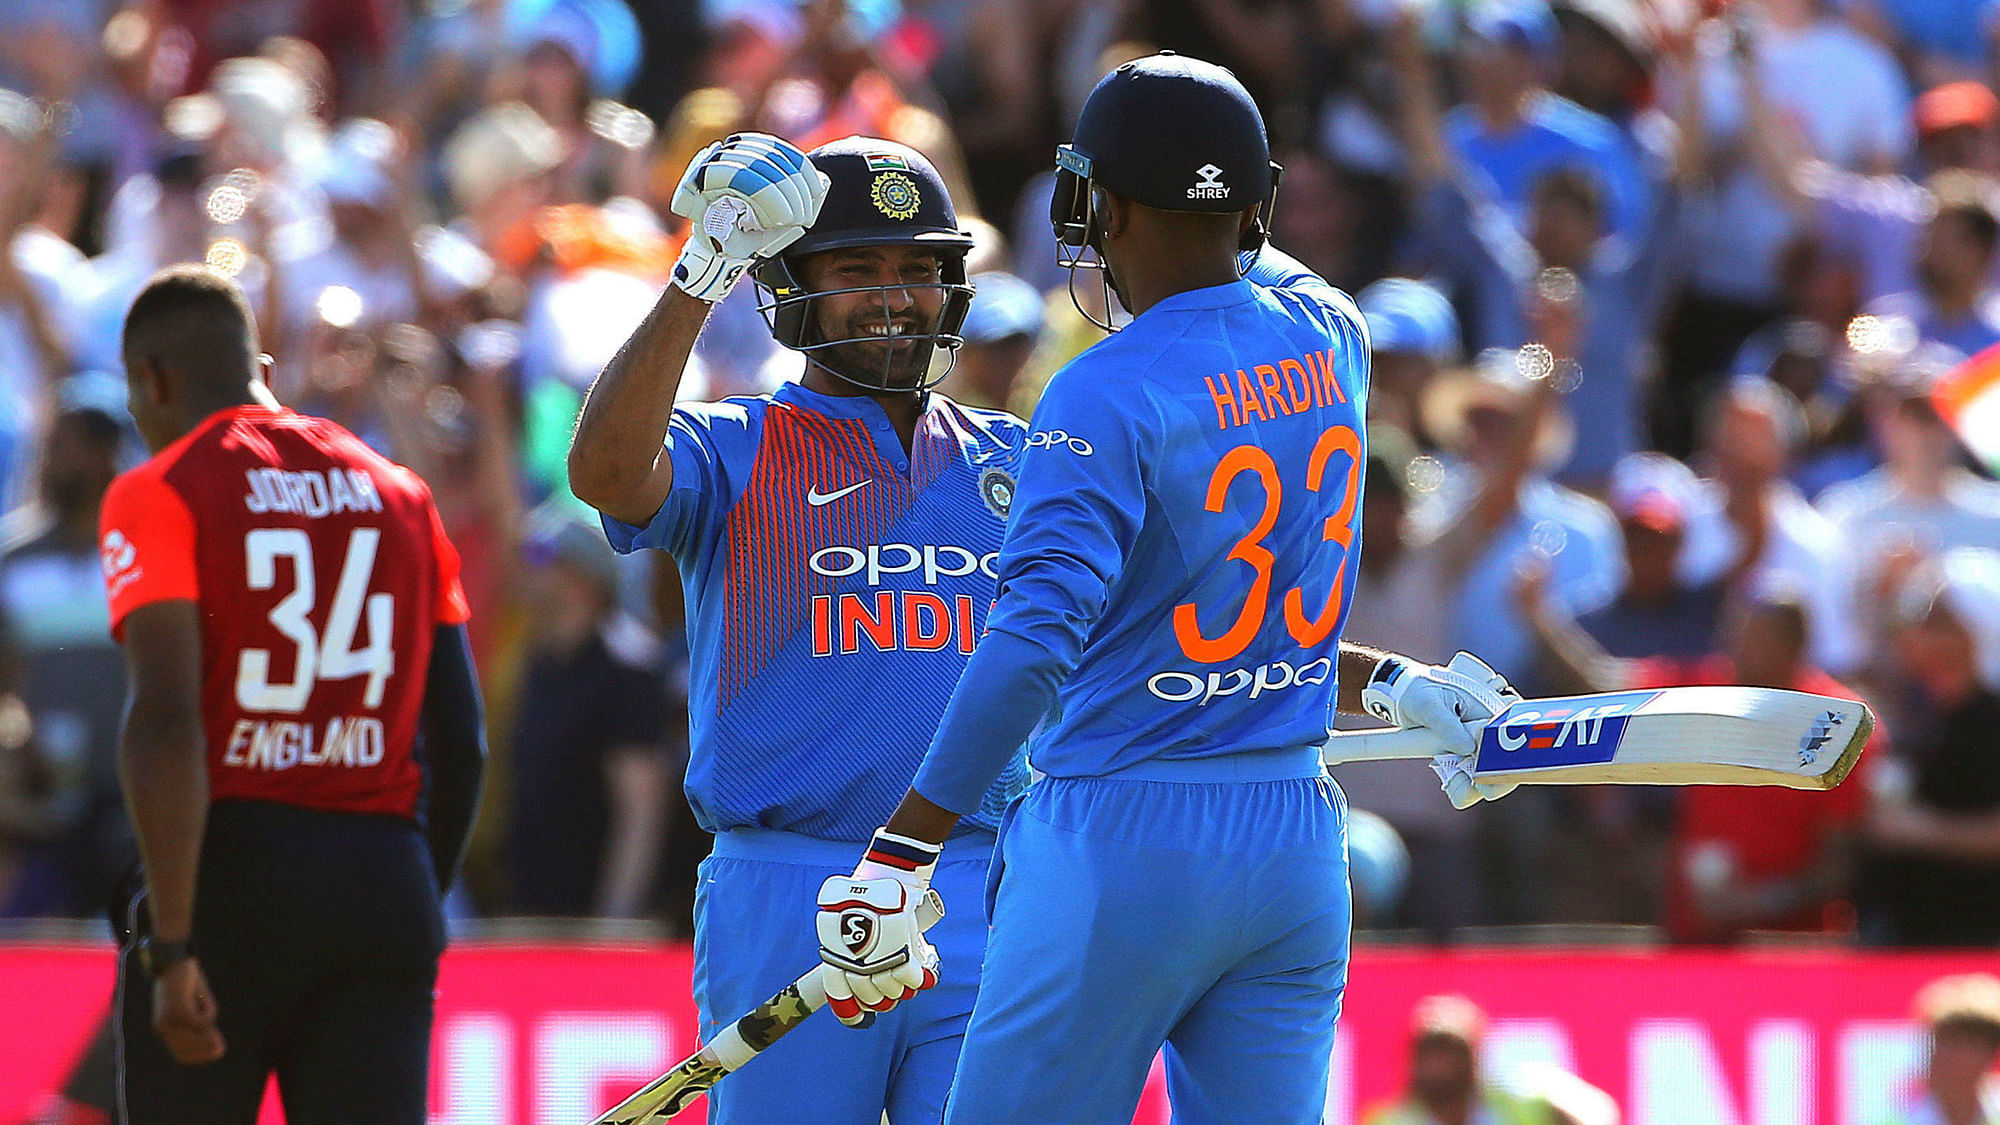 Rohit Sharma’s century helped India beat England by seven wickets.